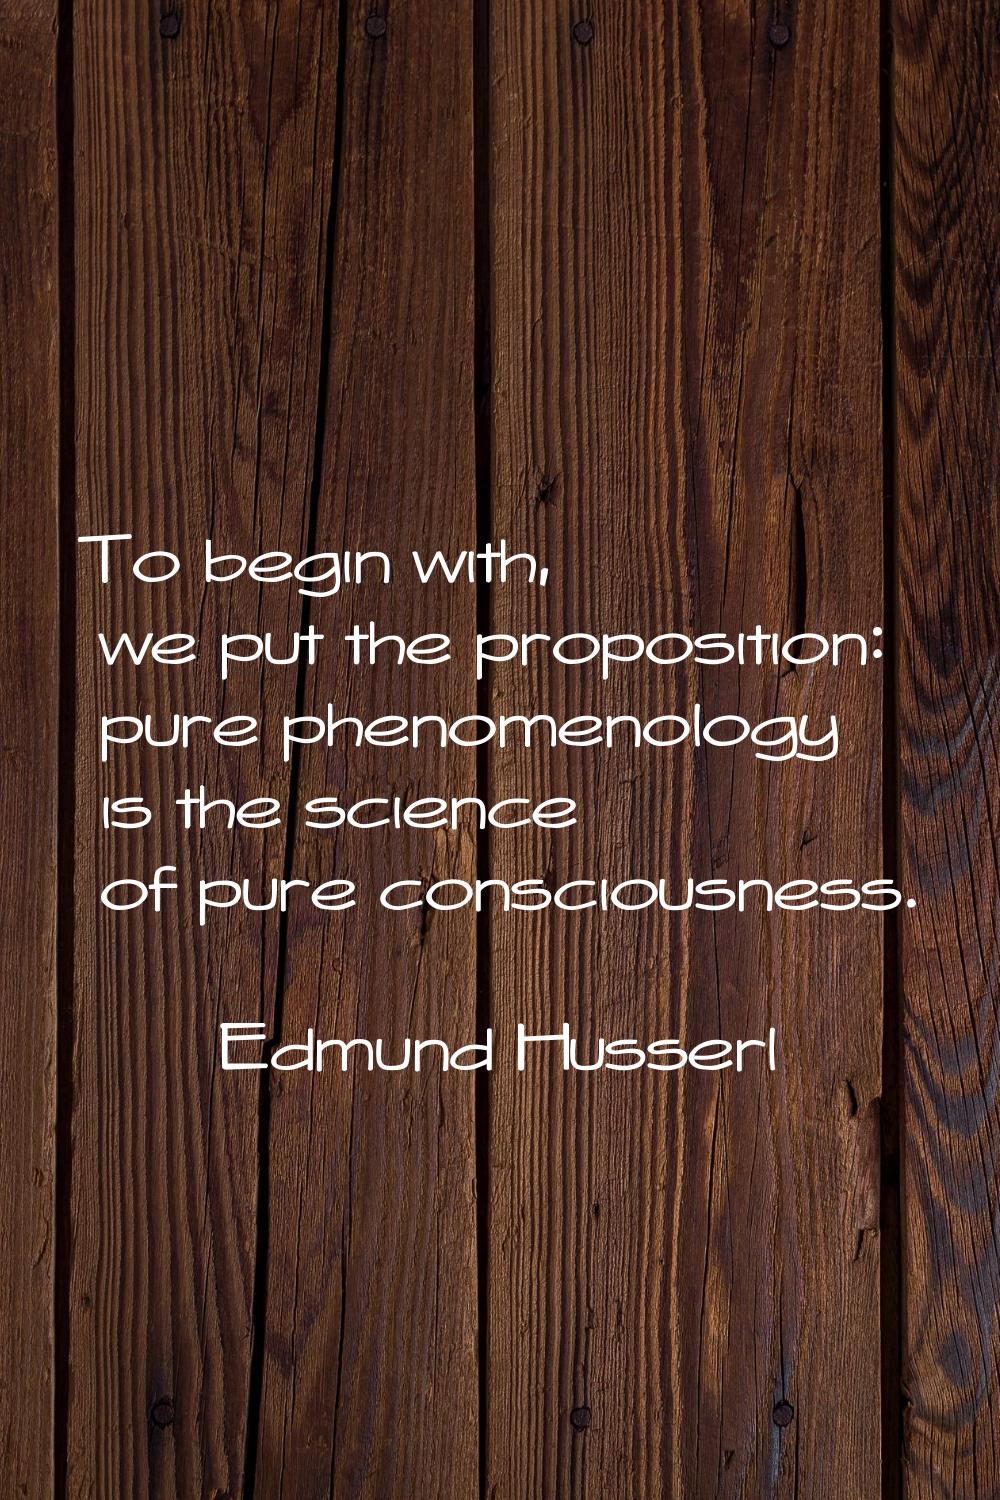 To begin with, we put the proposition: pure phenomenology is the science of pure consciousness.